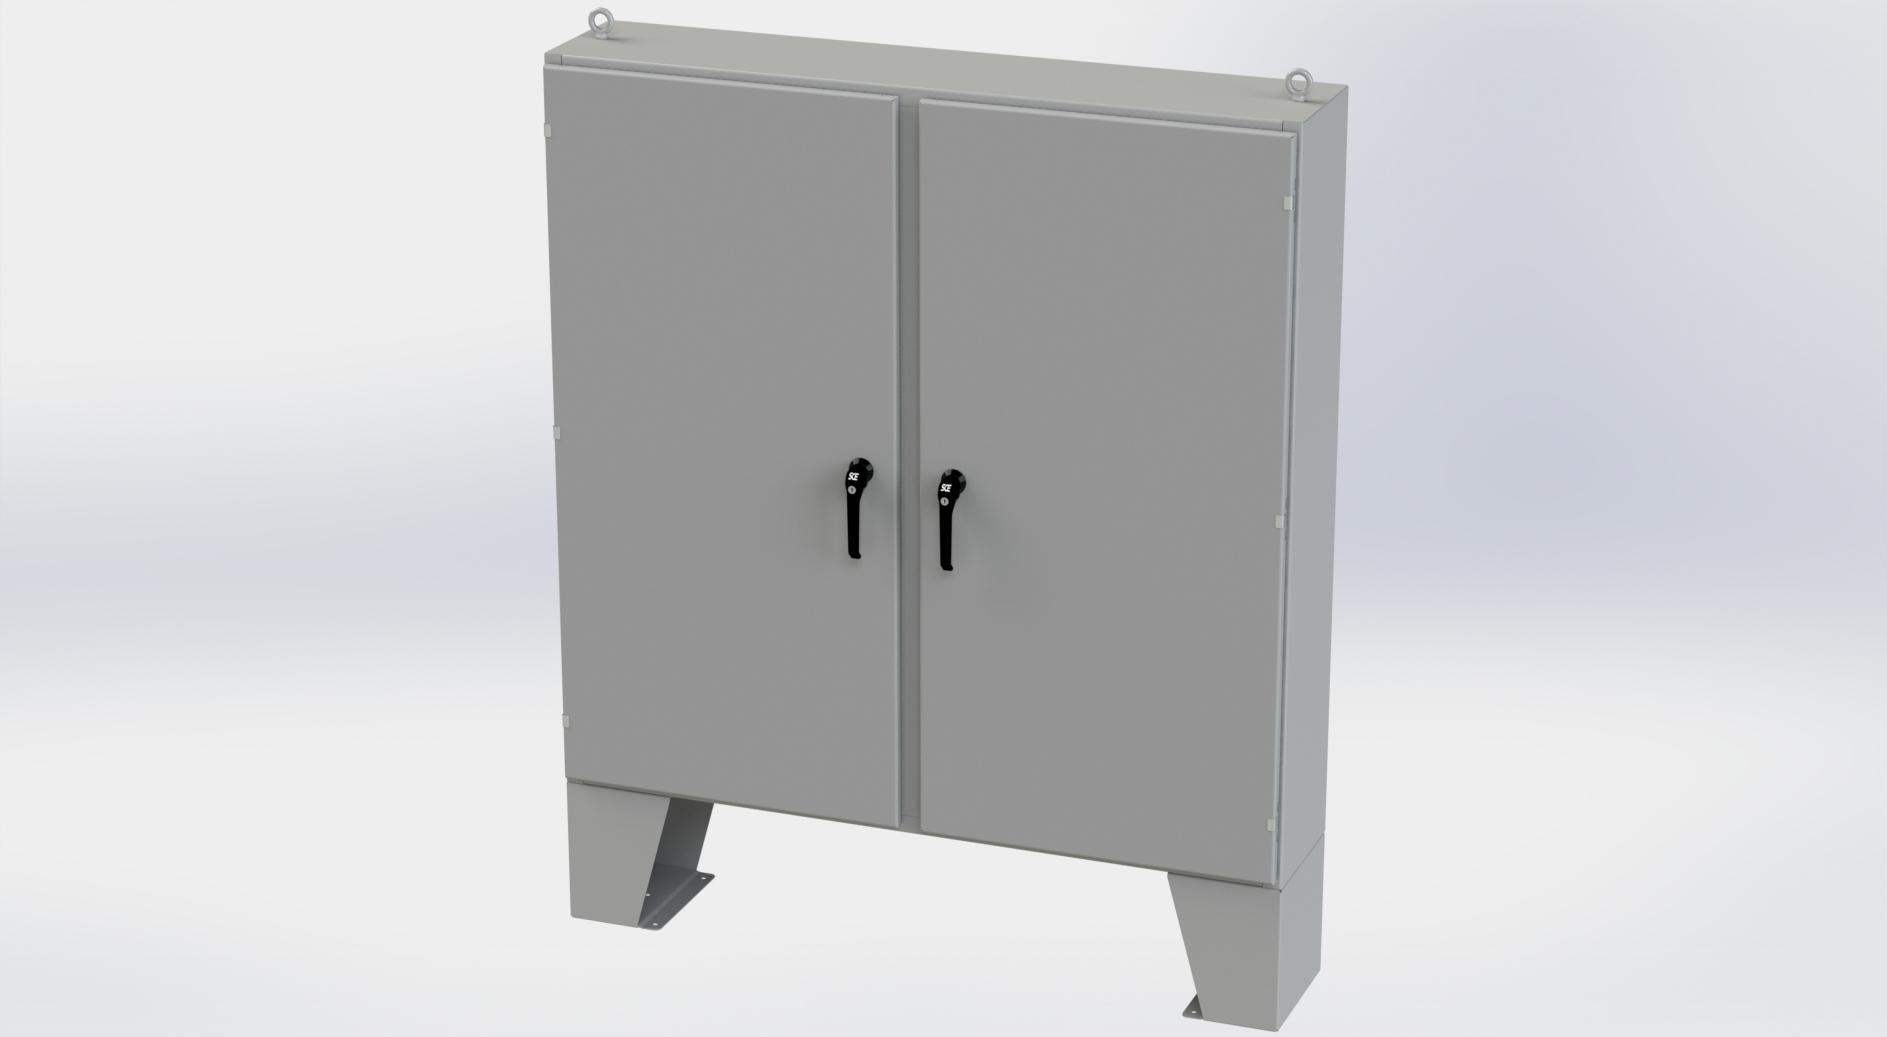 Saginaw Control SCE-60EL6012LPPL 2DR EL LPPL Enclosure, Height:60.00", Width:60.00", Depth:12.00", ANSI-61 gray powder coating inside and out. Optional sub-panels are powder coated white.